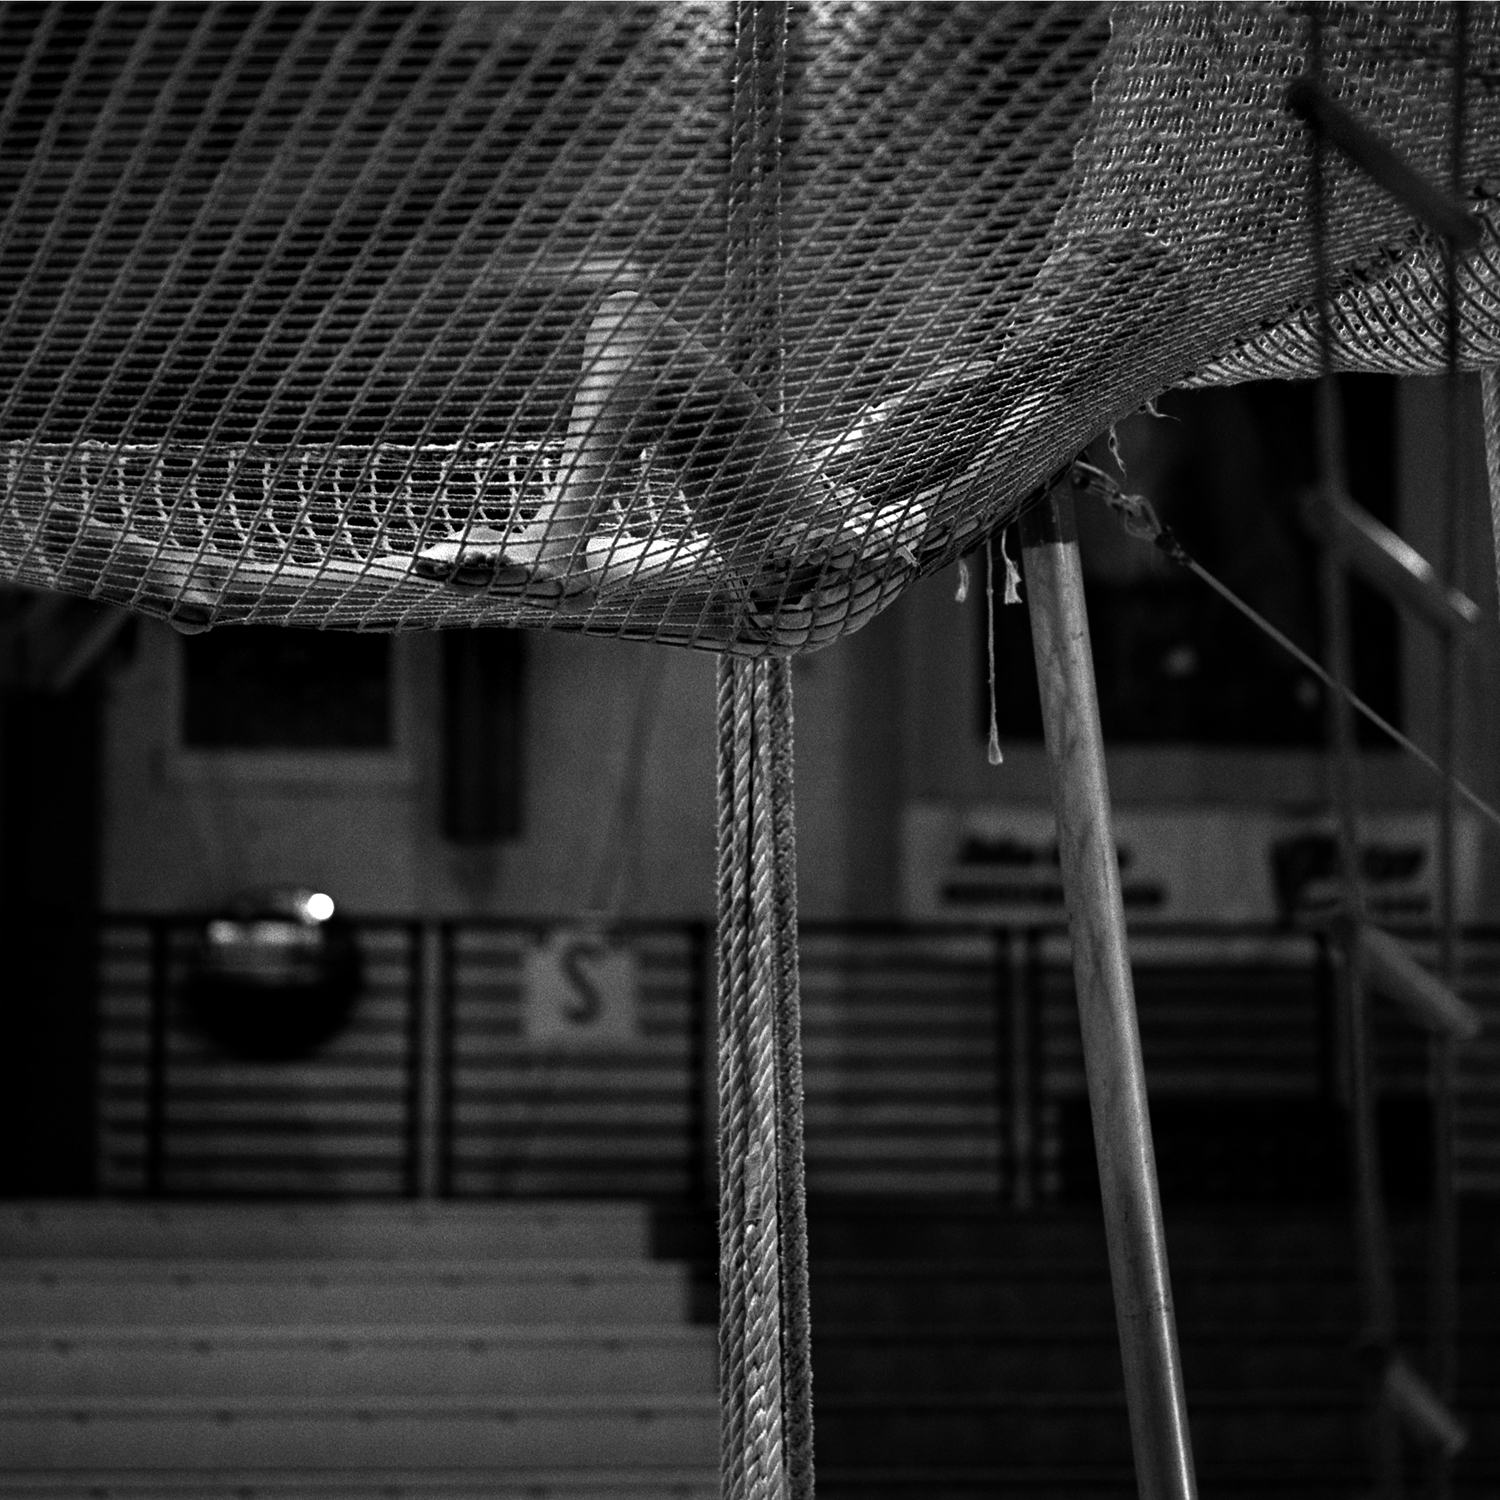 Josie Murphy, 13, rests between practice sessions. Josie is a third generation flying trapeze performer, one of a number of families whose participation spans generations. The following year she could no longer perform because basketball presented a scheduling conflict.